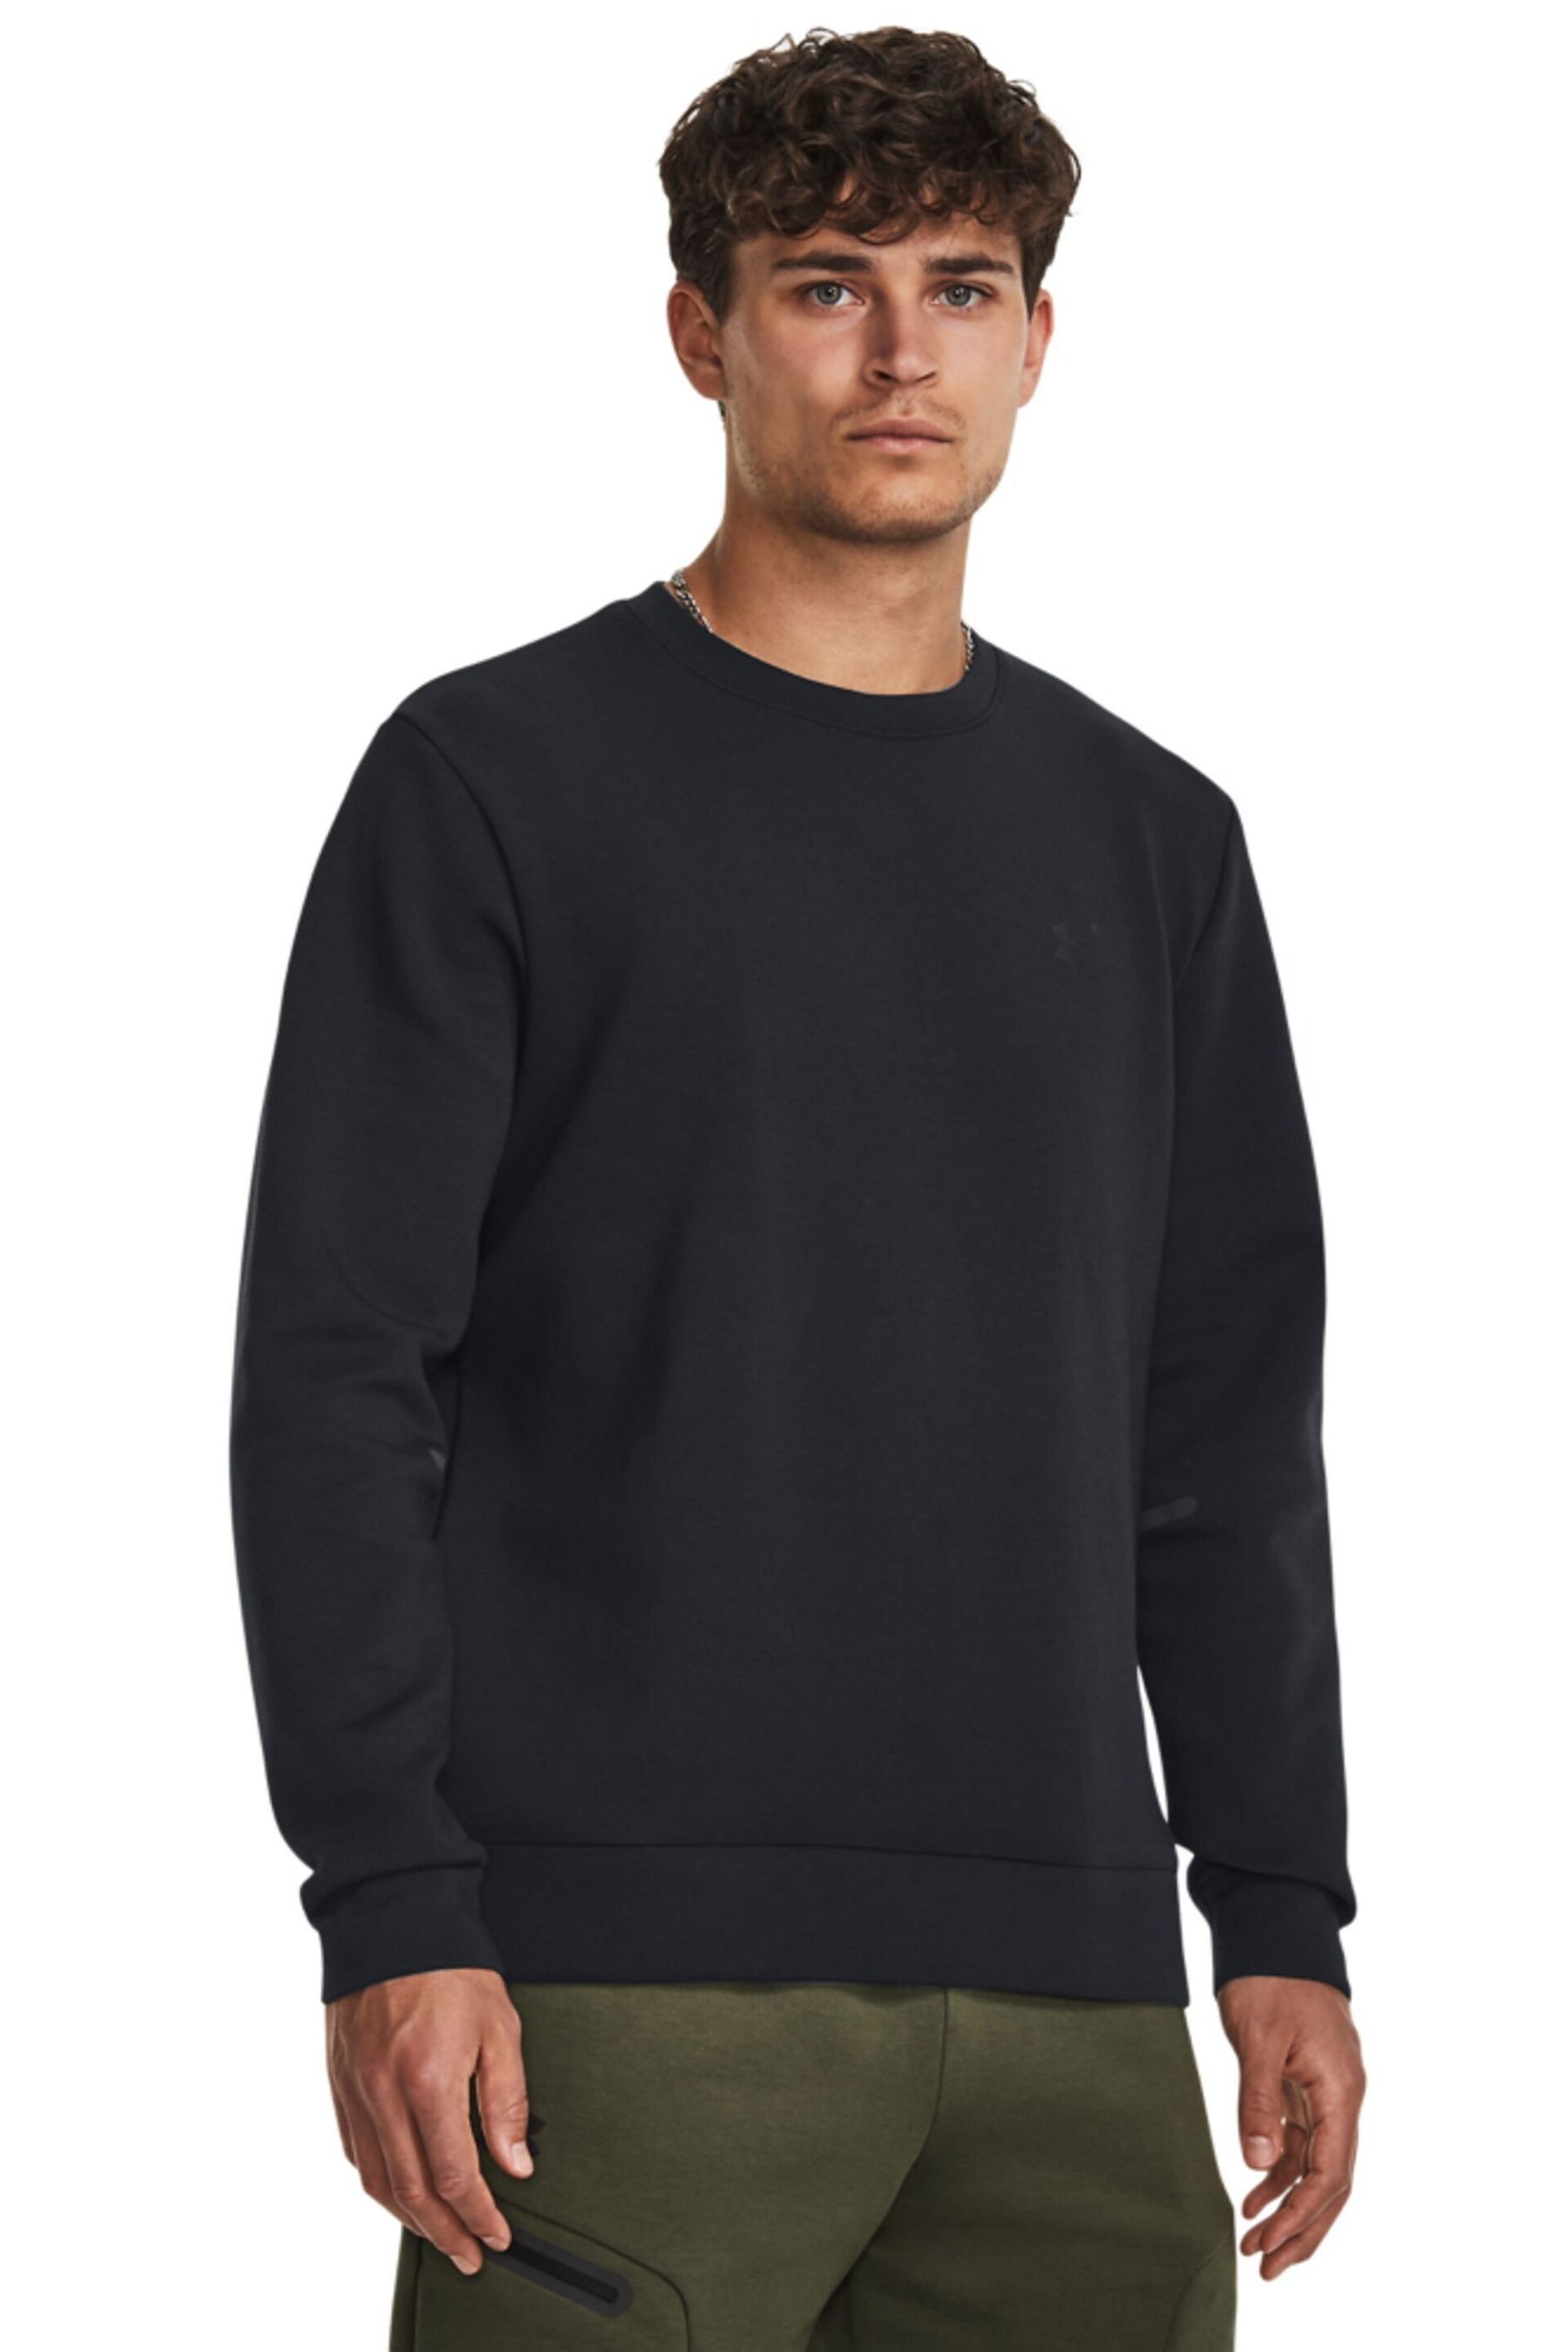 Under Armour Black Unstoppable Crew Neck Fleece - Image 1 of 6